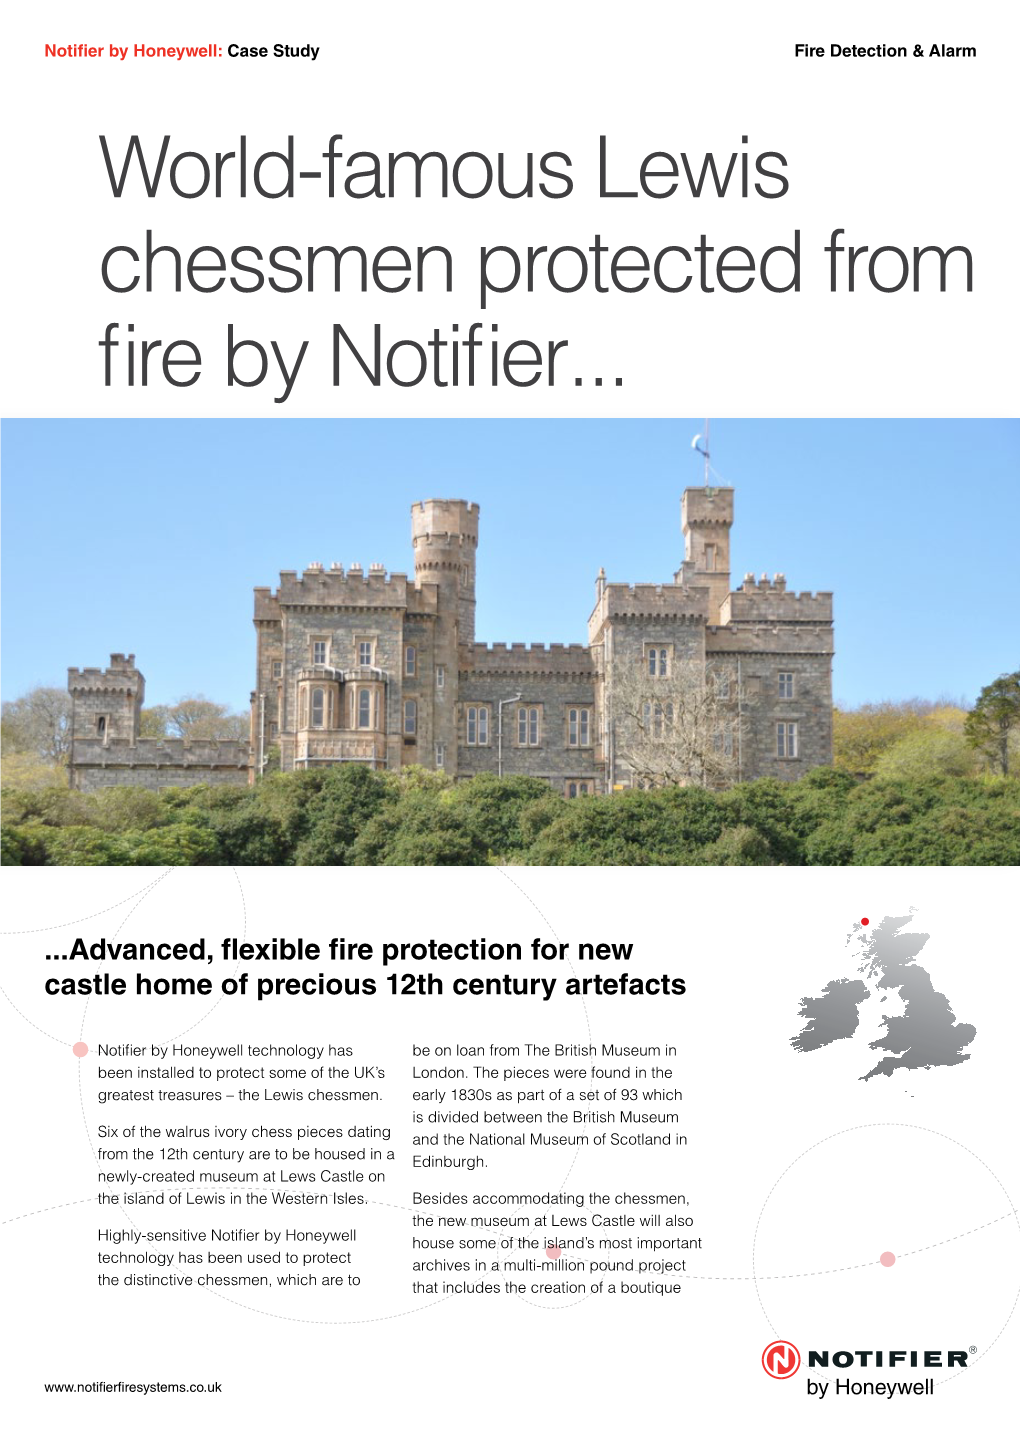 World-Famous Lewis Chessmen Protected from Fire by Notifier